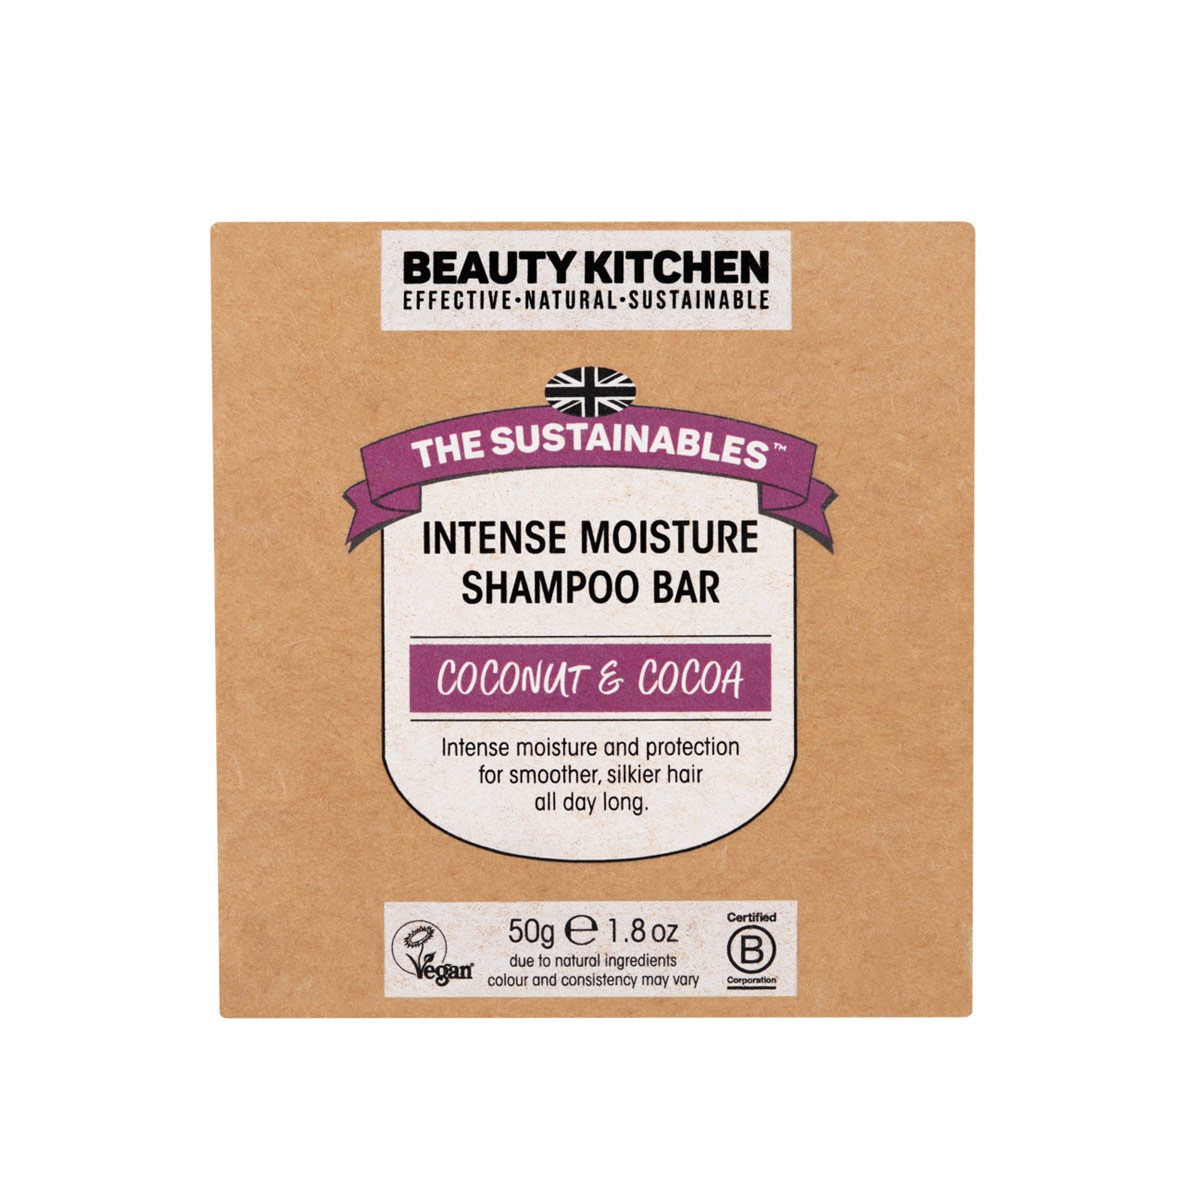 BEAUTY KITCHEN EFFECTIVE-NATURAL-SUSTAINABLE ST T T INTENSE MOISTURE SHAMPOO BAR elb e b lh Y Intense moisture and protection for smoother, silkier hair all day long. G raas colour and consistency may vary 